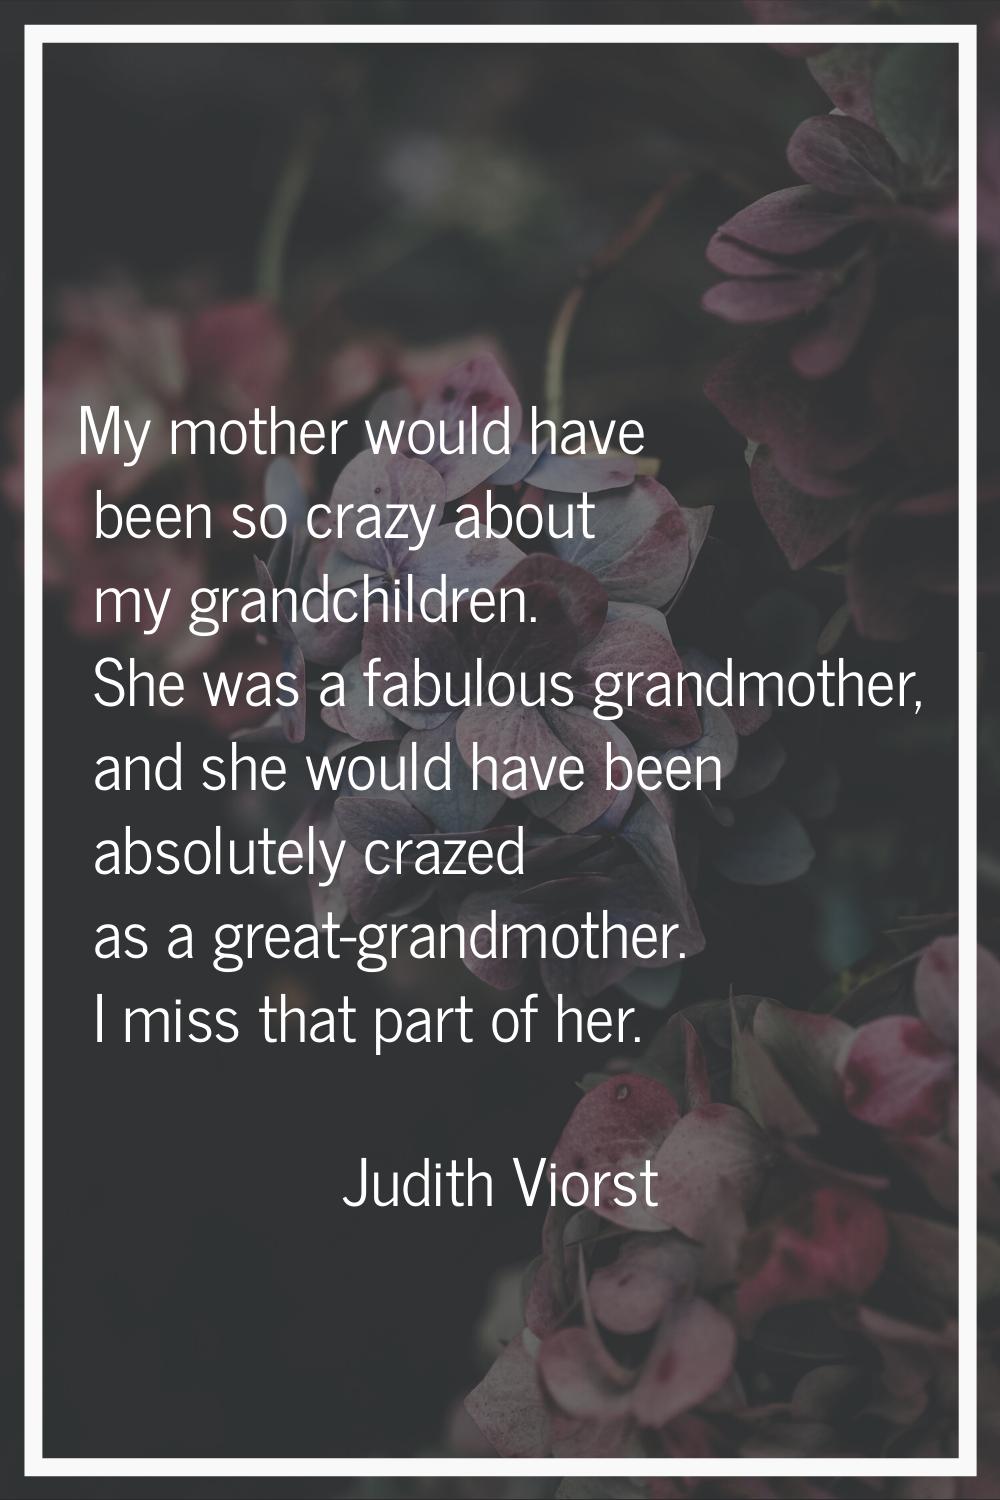 My mother would have been so crazy about my grandchildren. She was a fabulous grandmother, and she 